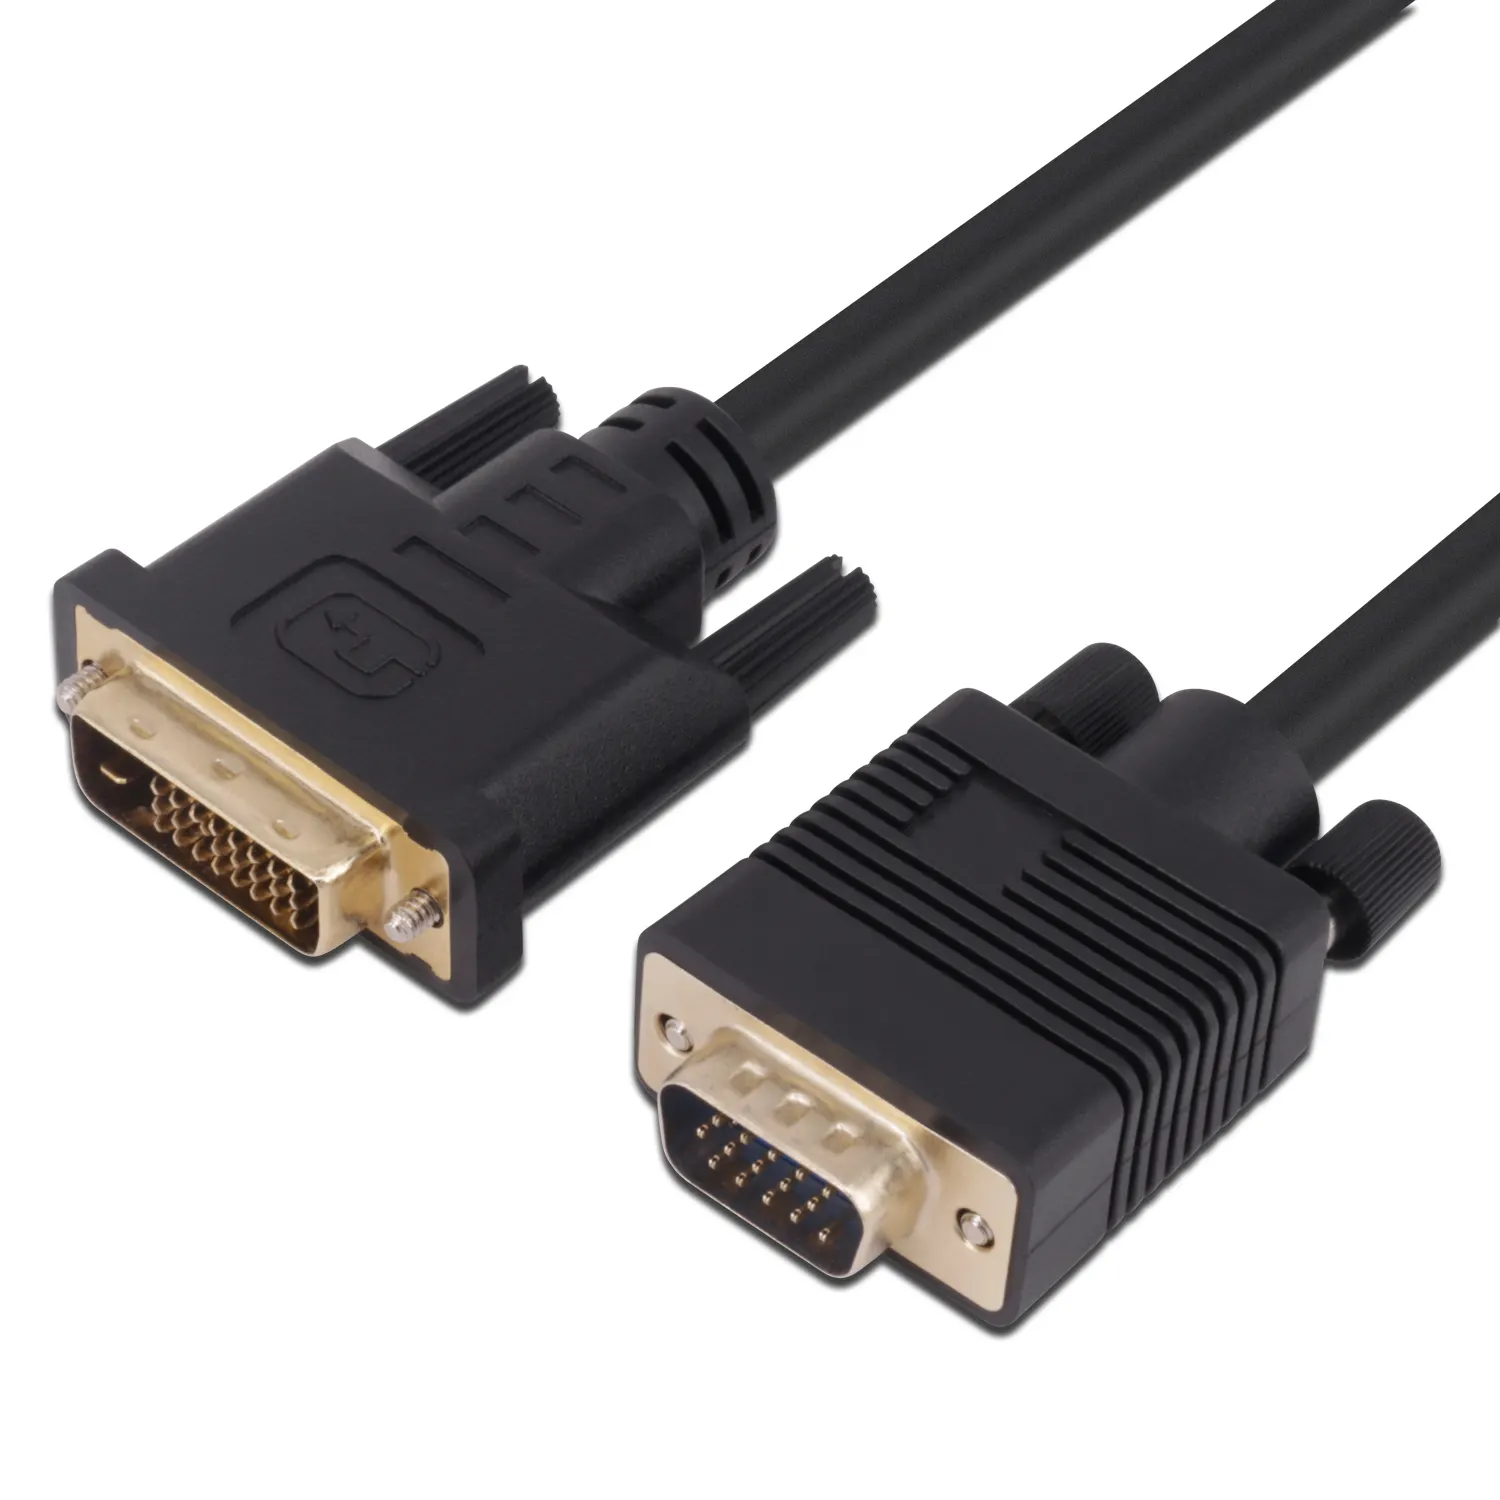 DVI 24+1 convert to vga adapter cable gold plated 19 pin or 24 pin DVI to VGA cables